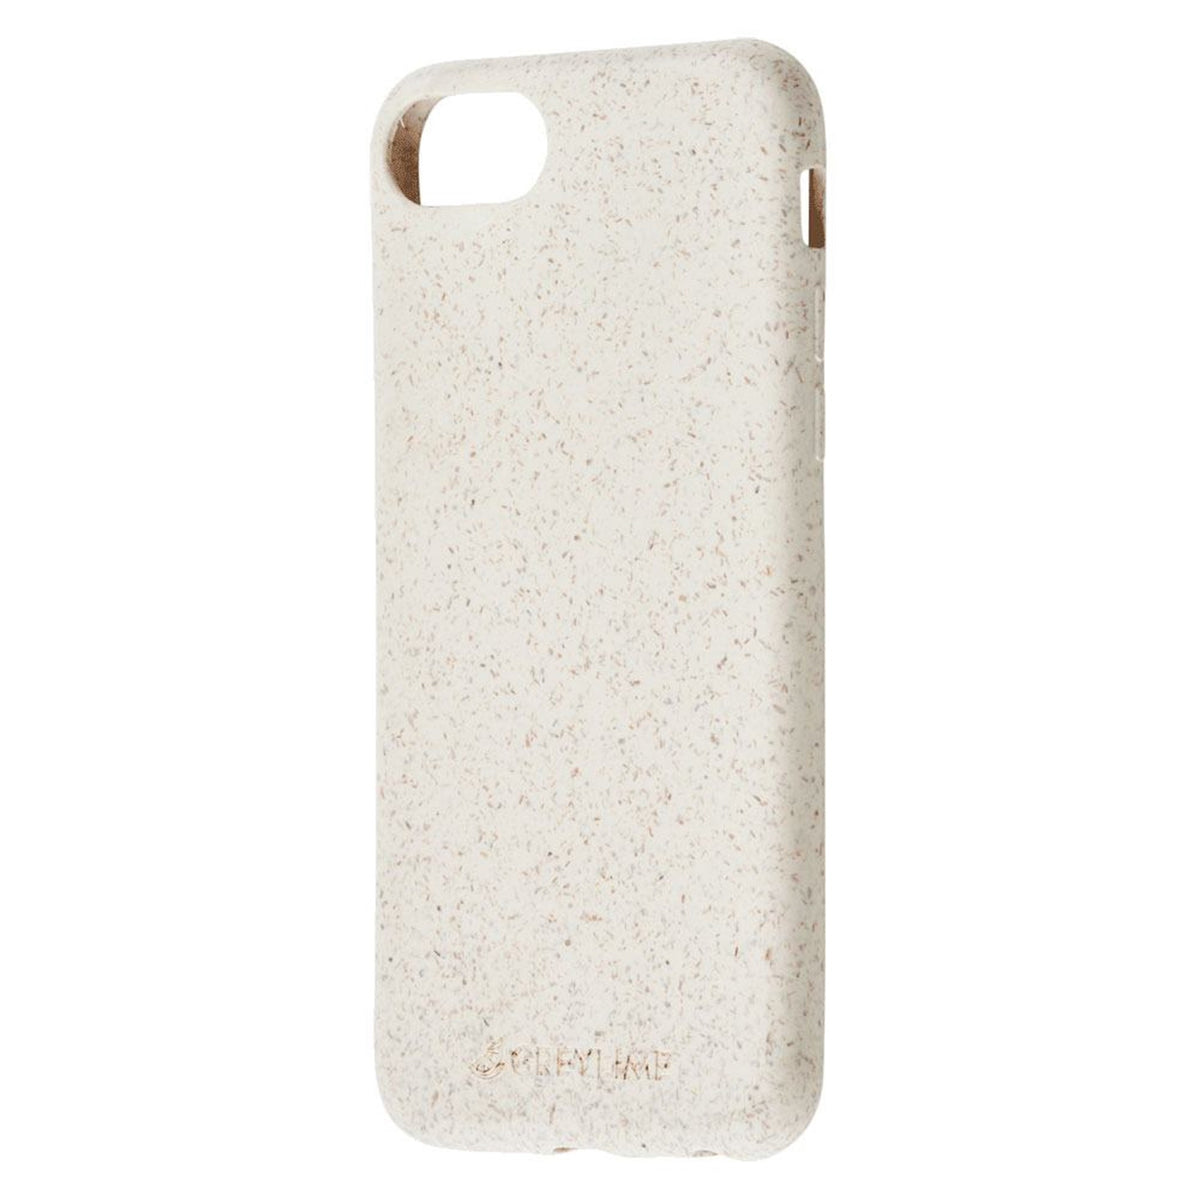 GreyLime-iPhone-6-7-8-Plus-biodegradable-cover-Beige-COIP6780P02-V2.jpg